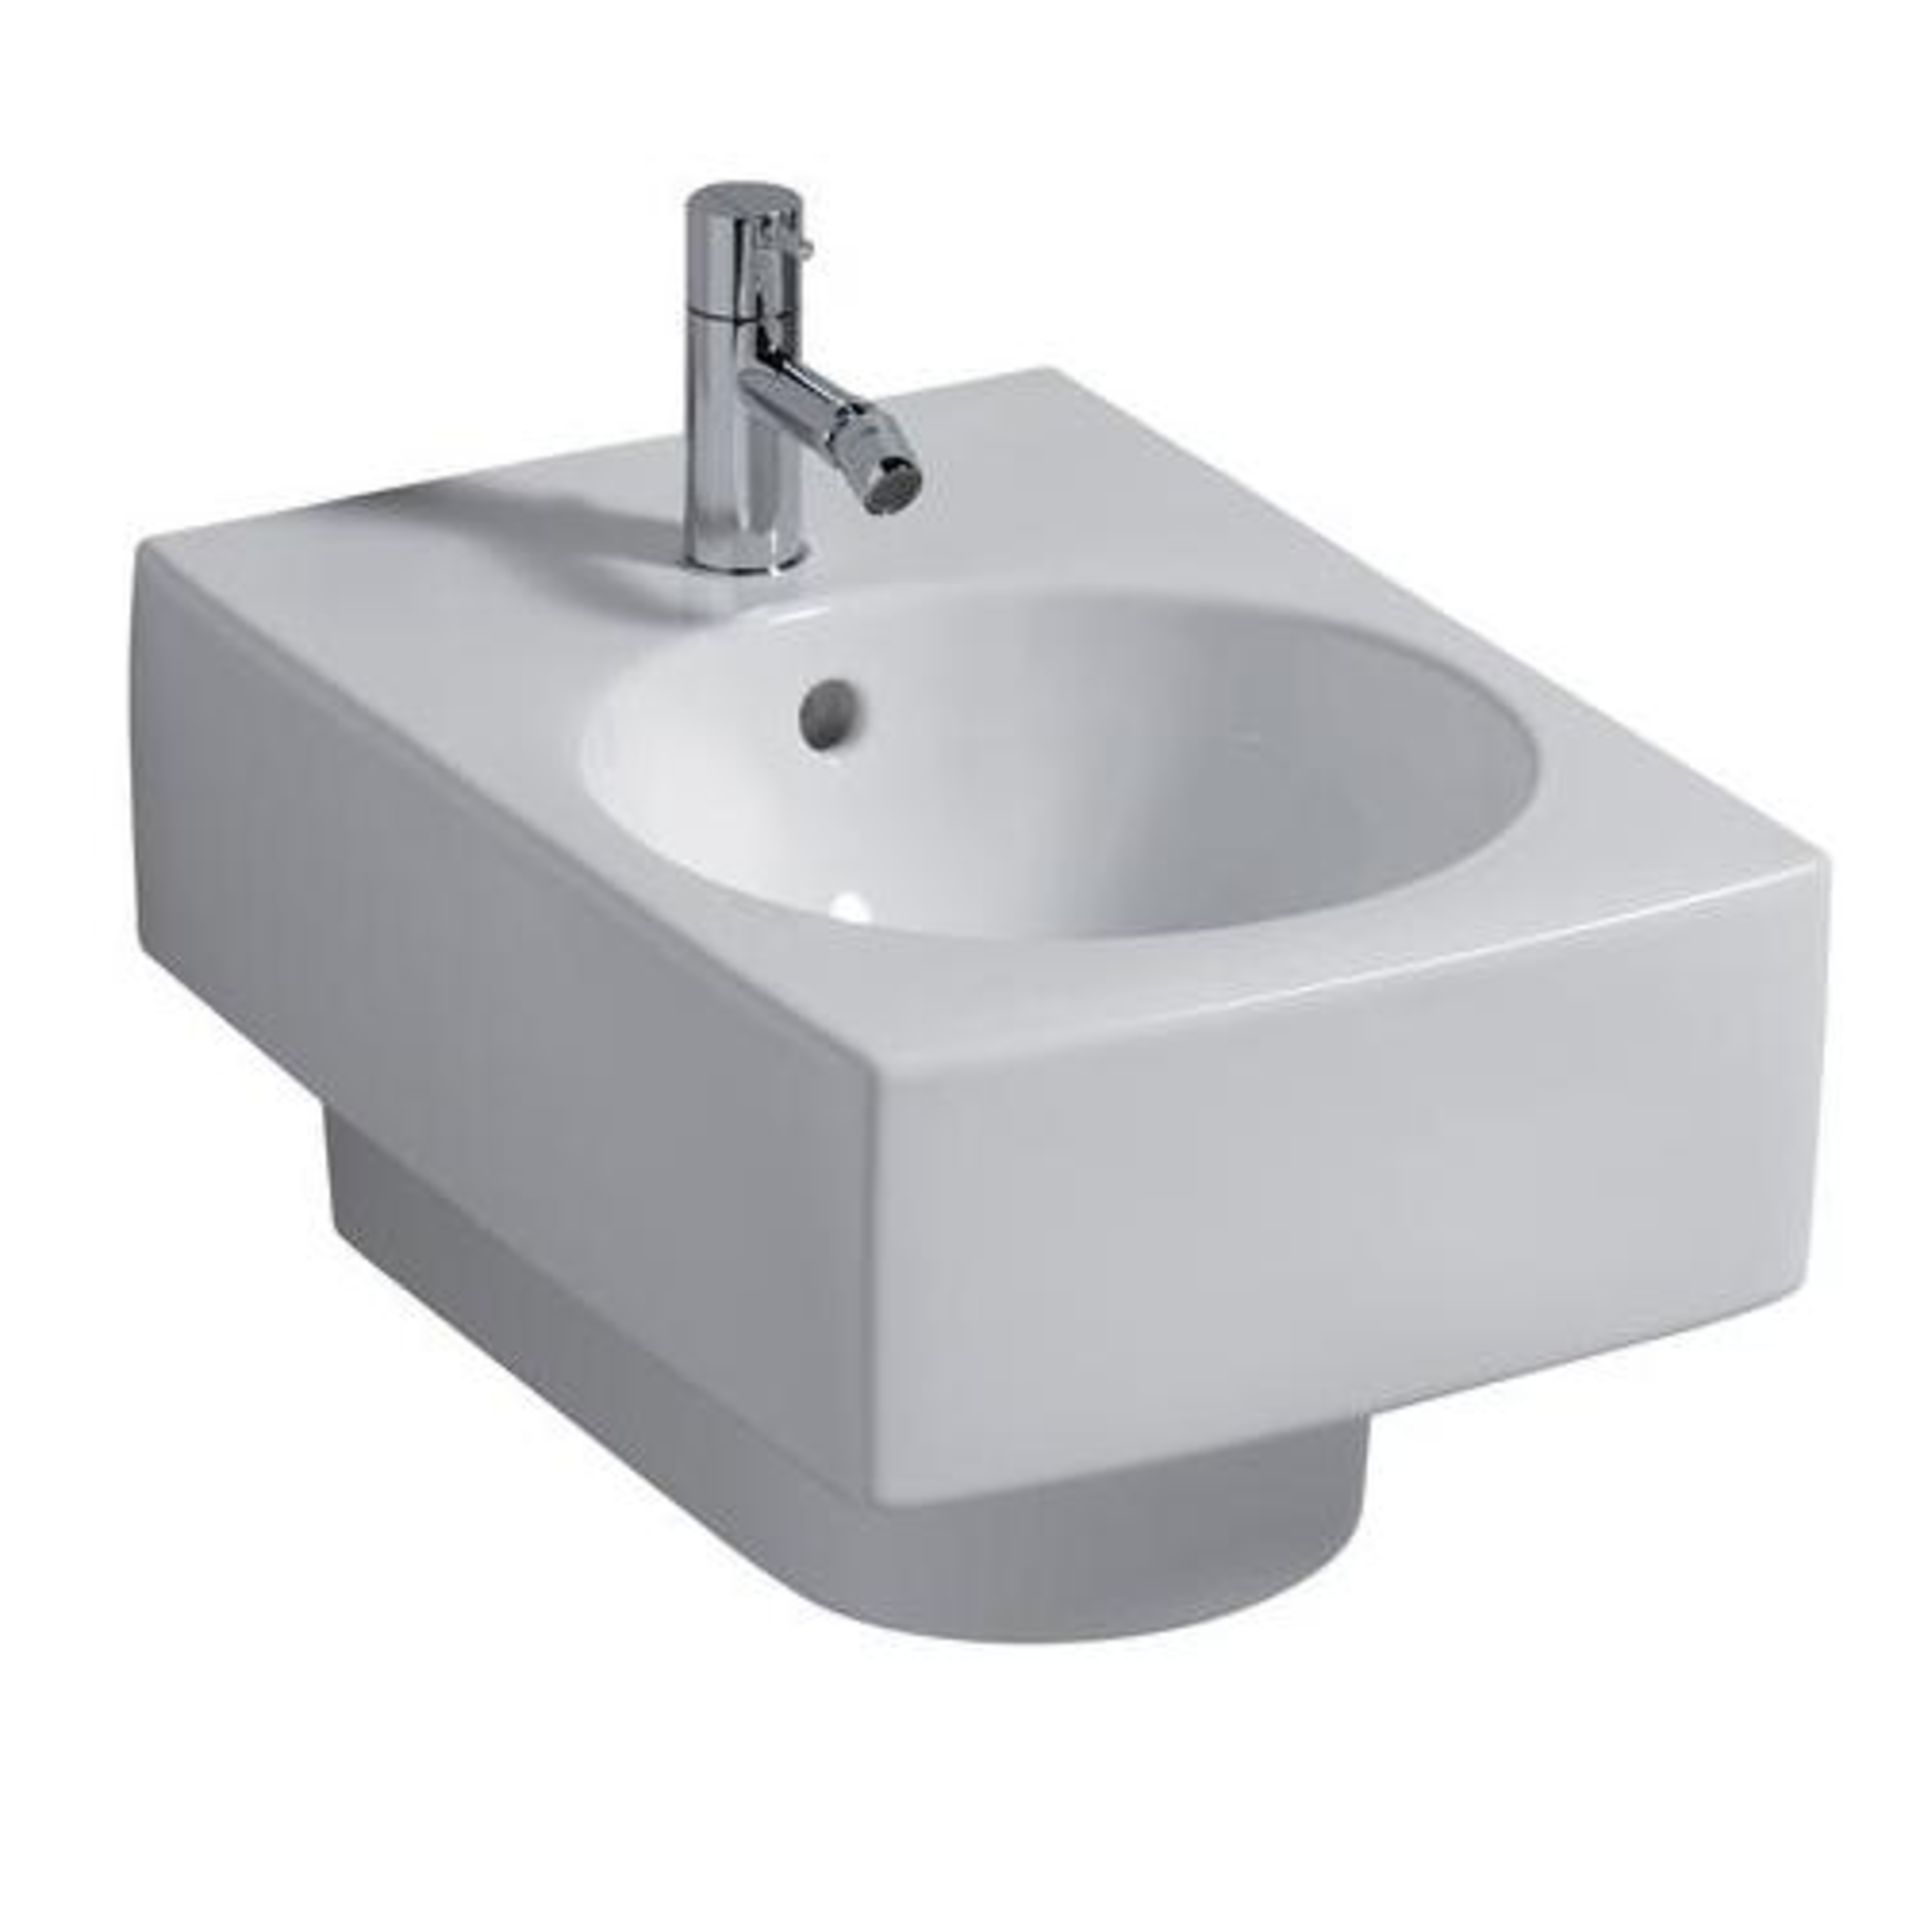 (PC136) Keramag Preciosa II Wall Hung Bidet. wall hung Fits effortlessly into even the most co...( - Image 2 of 3